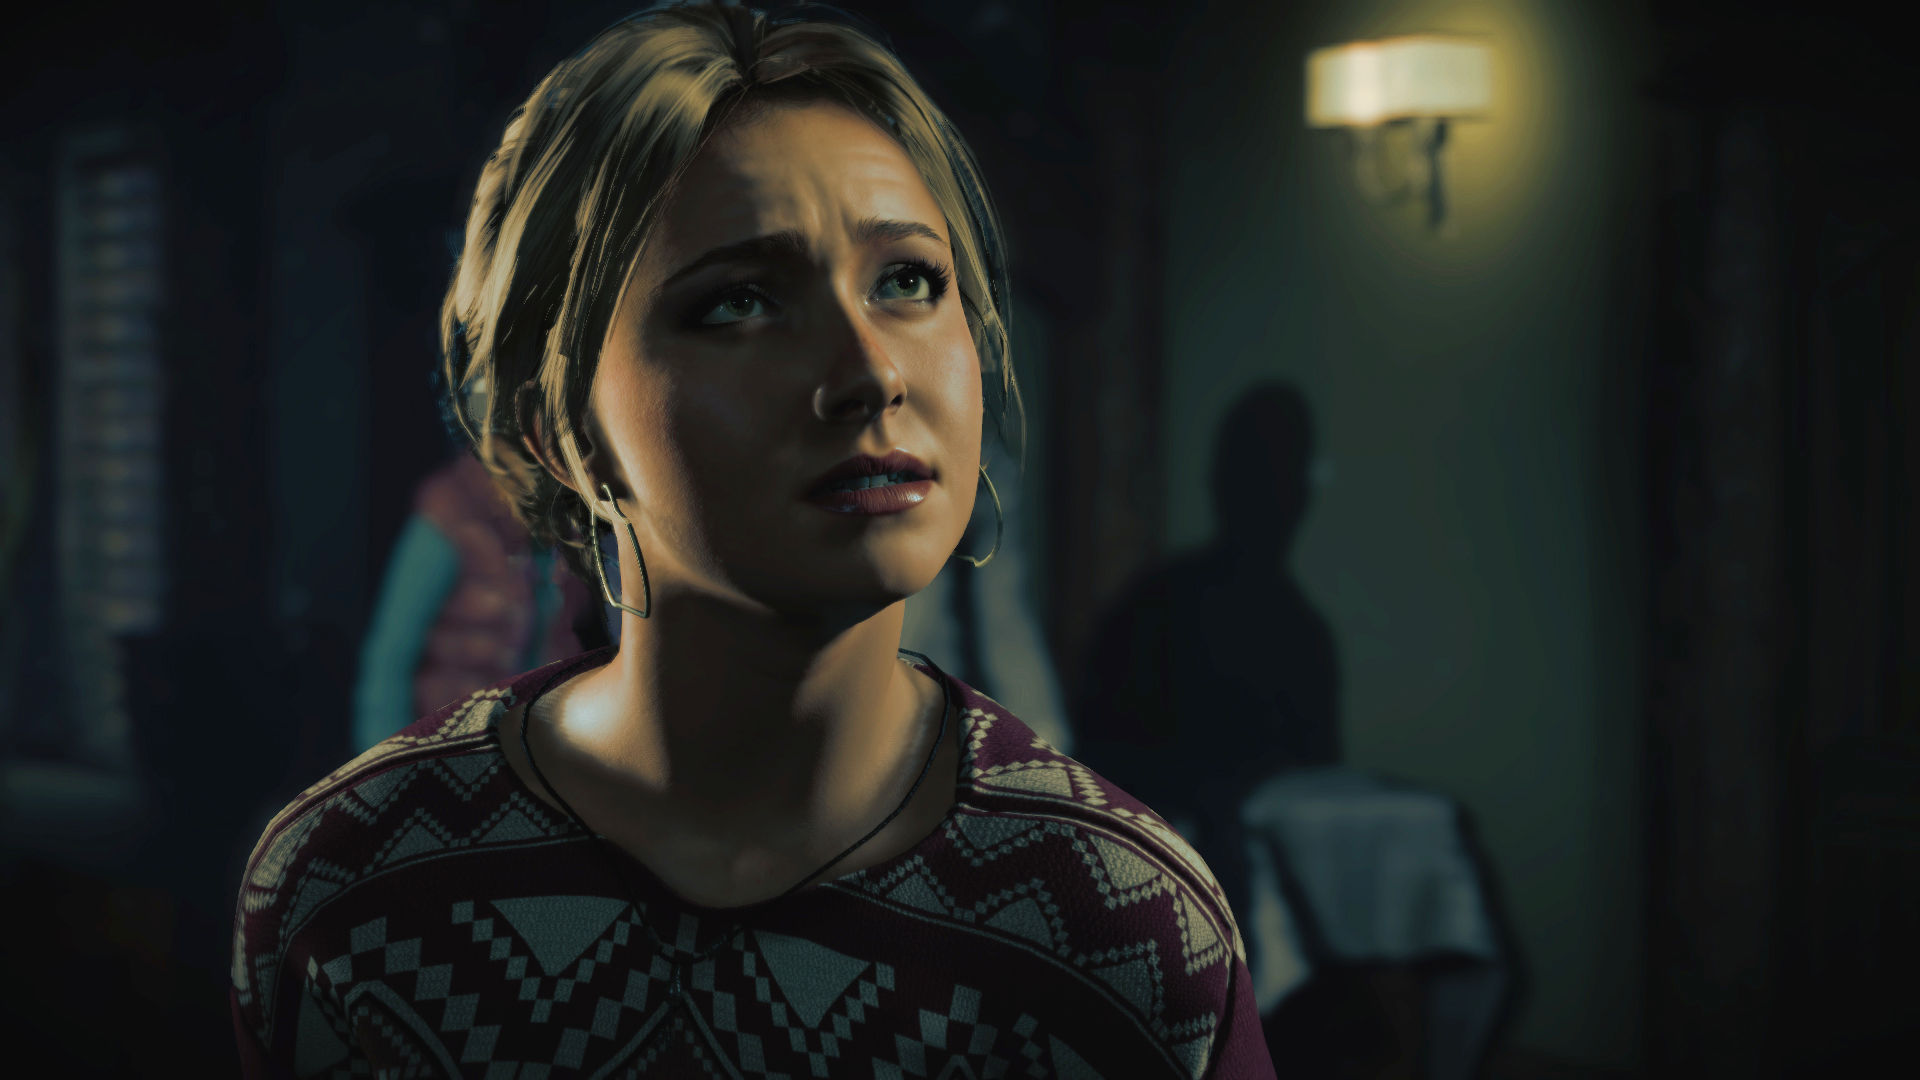 9 years later, Until Dawn is finally coming to PC with a new rebuild